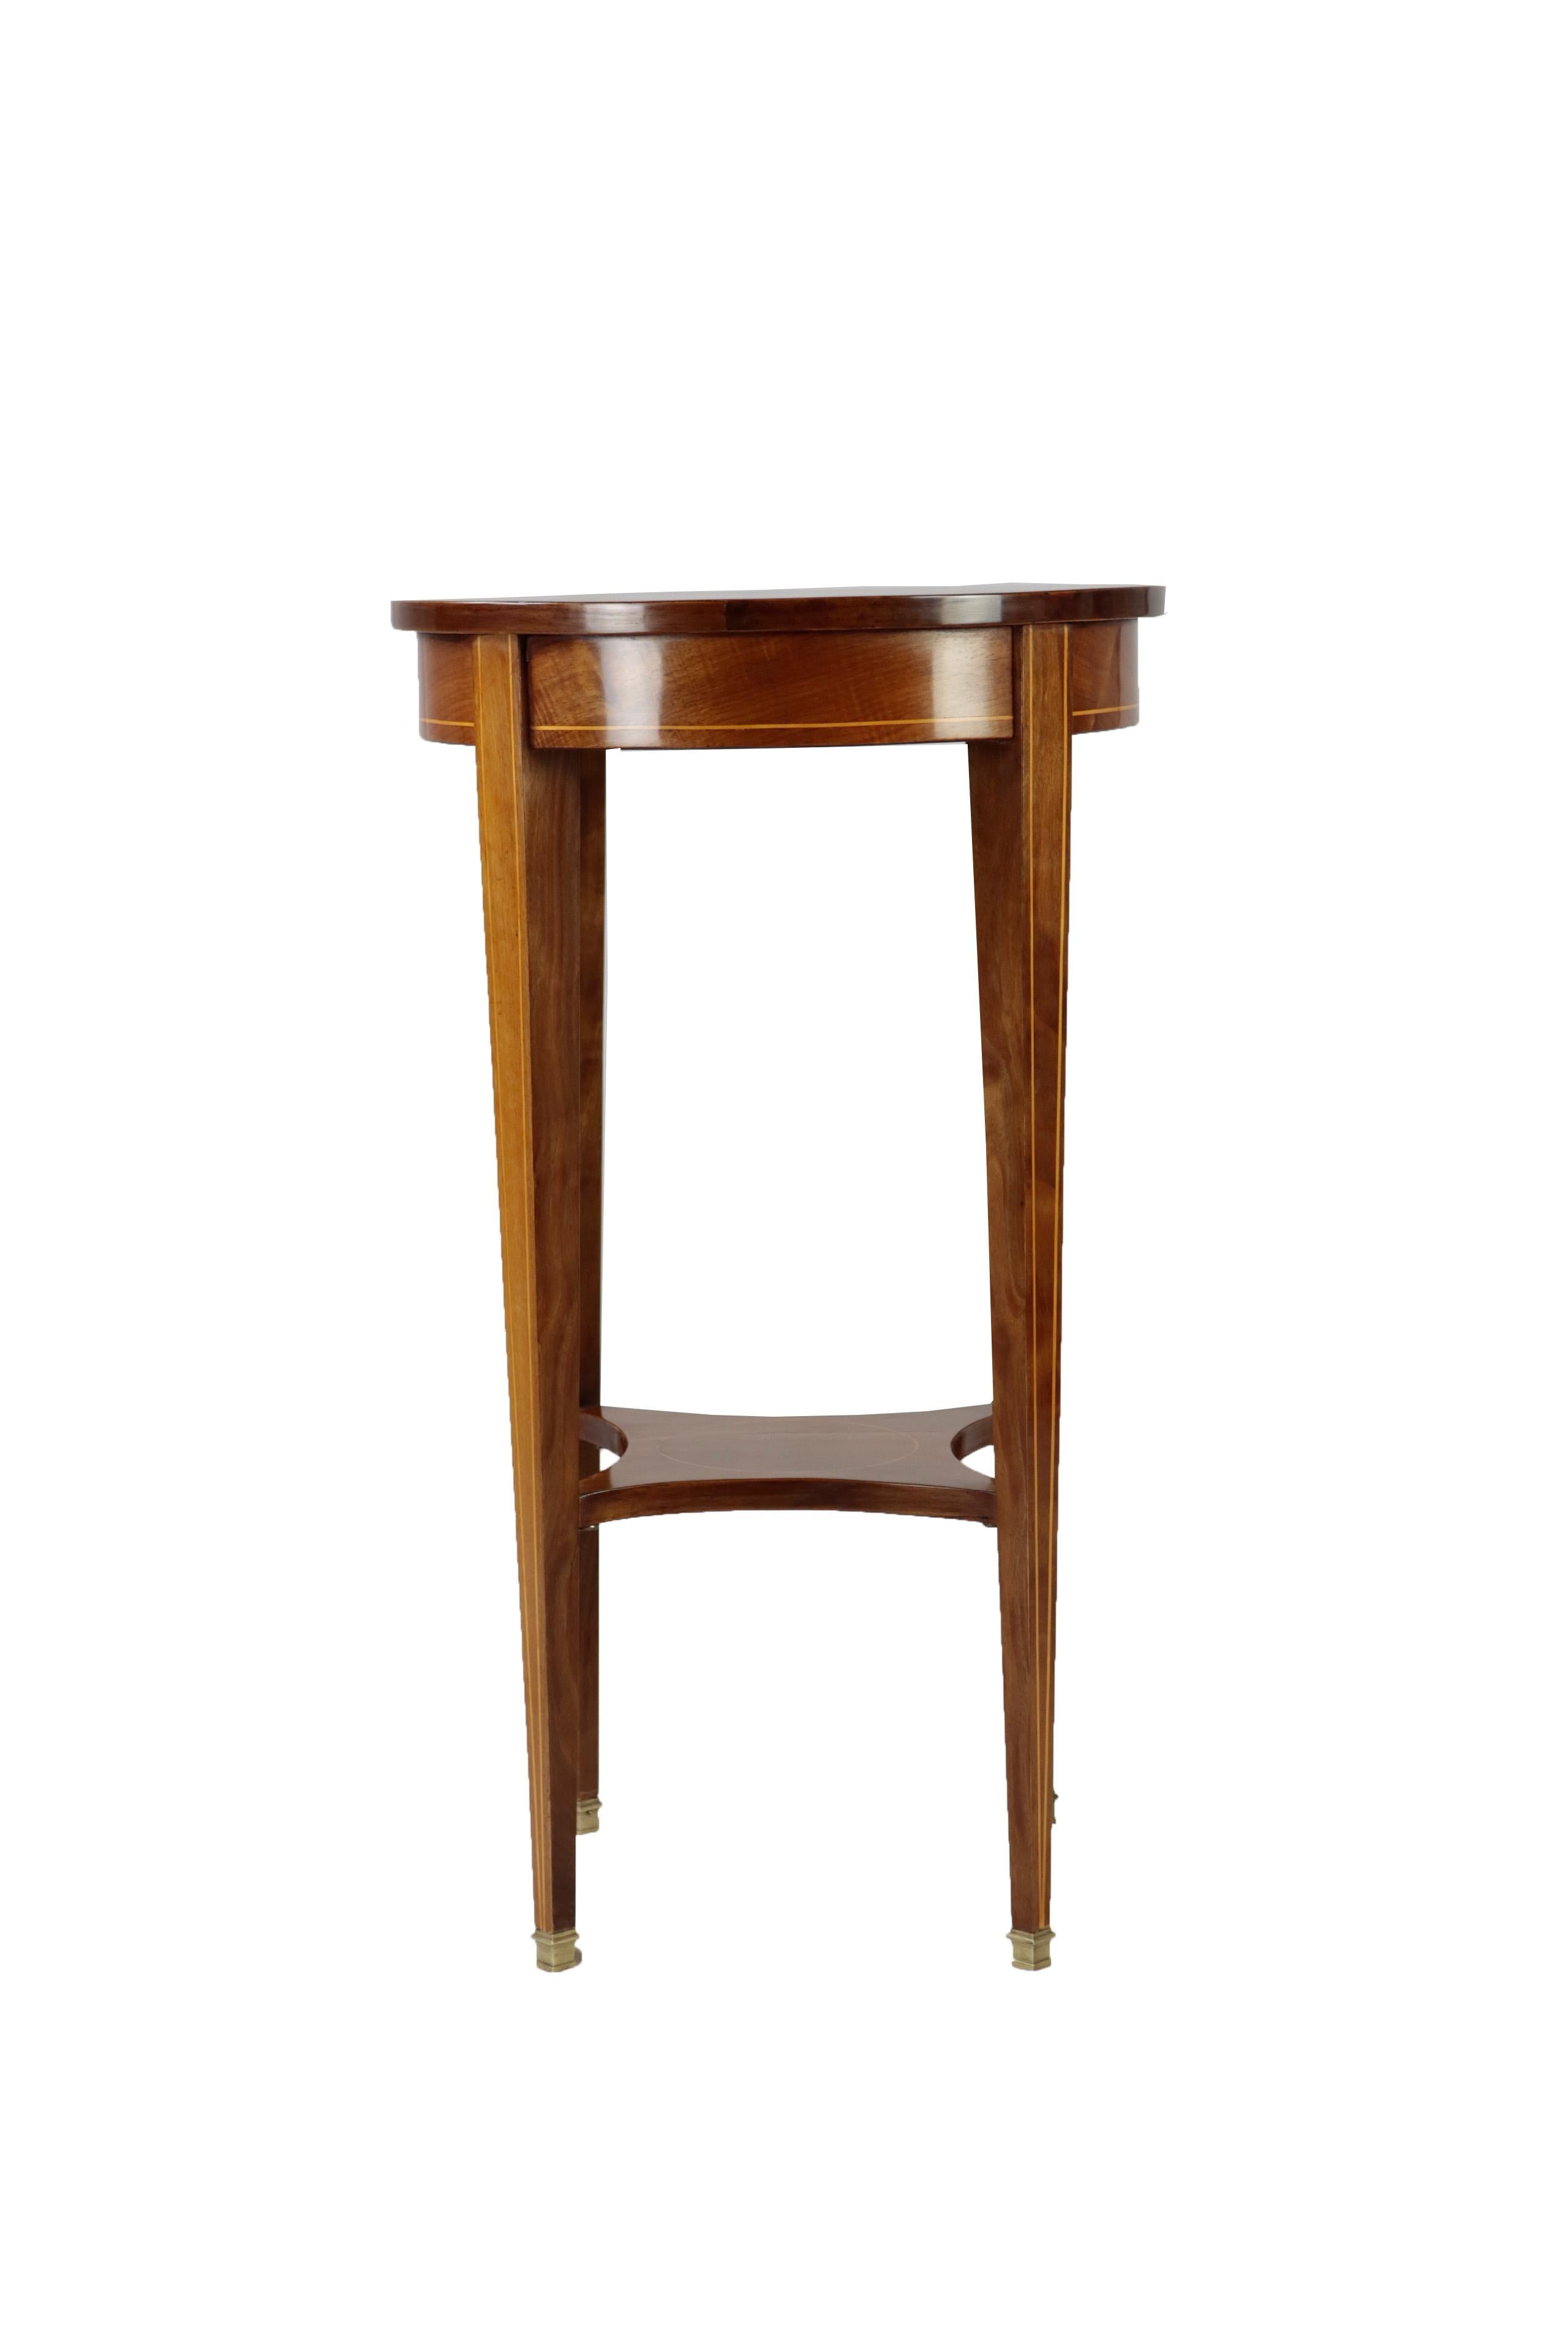 • Late 19th century side table
• France, circa 1880-1890
• Rosewood veneered 
• Restored residential-ready state
• French shellac hand polish
• Measure: Height 75 cm, diameter 43 cm.








 